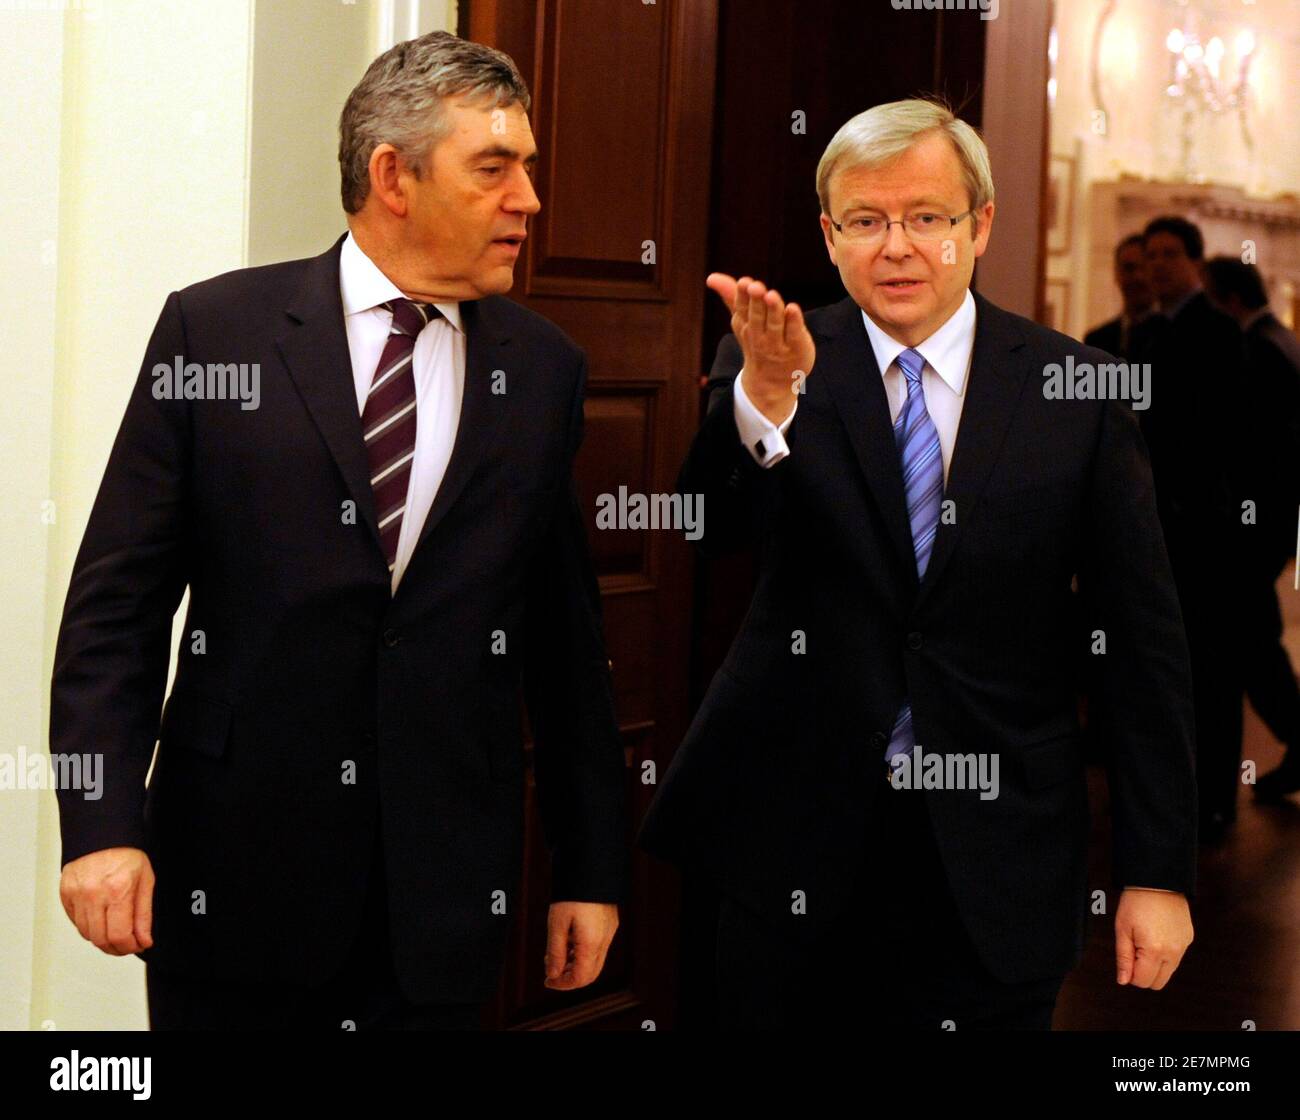 British Prime Minister Gordon Brown (L) walks with Australian Prime Minister Kevin Rudd after a bilateral meeting at the Ambassador's Residence, in advance of the Summit on Financial Markets and the World Economy, in Washington November 14, 2008.    REUTERS/Mike Theiler (UNITED STATES) Stock Photo